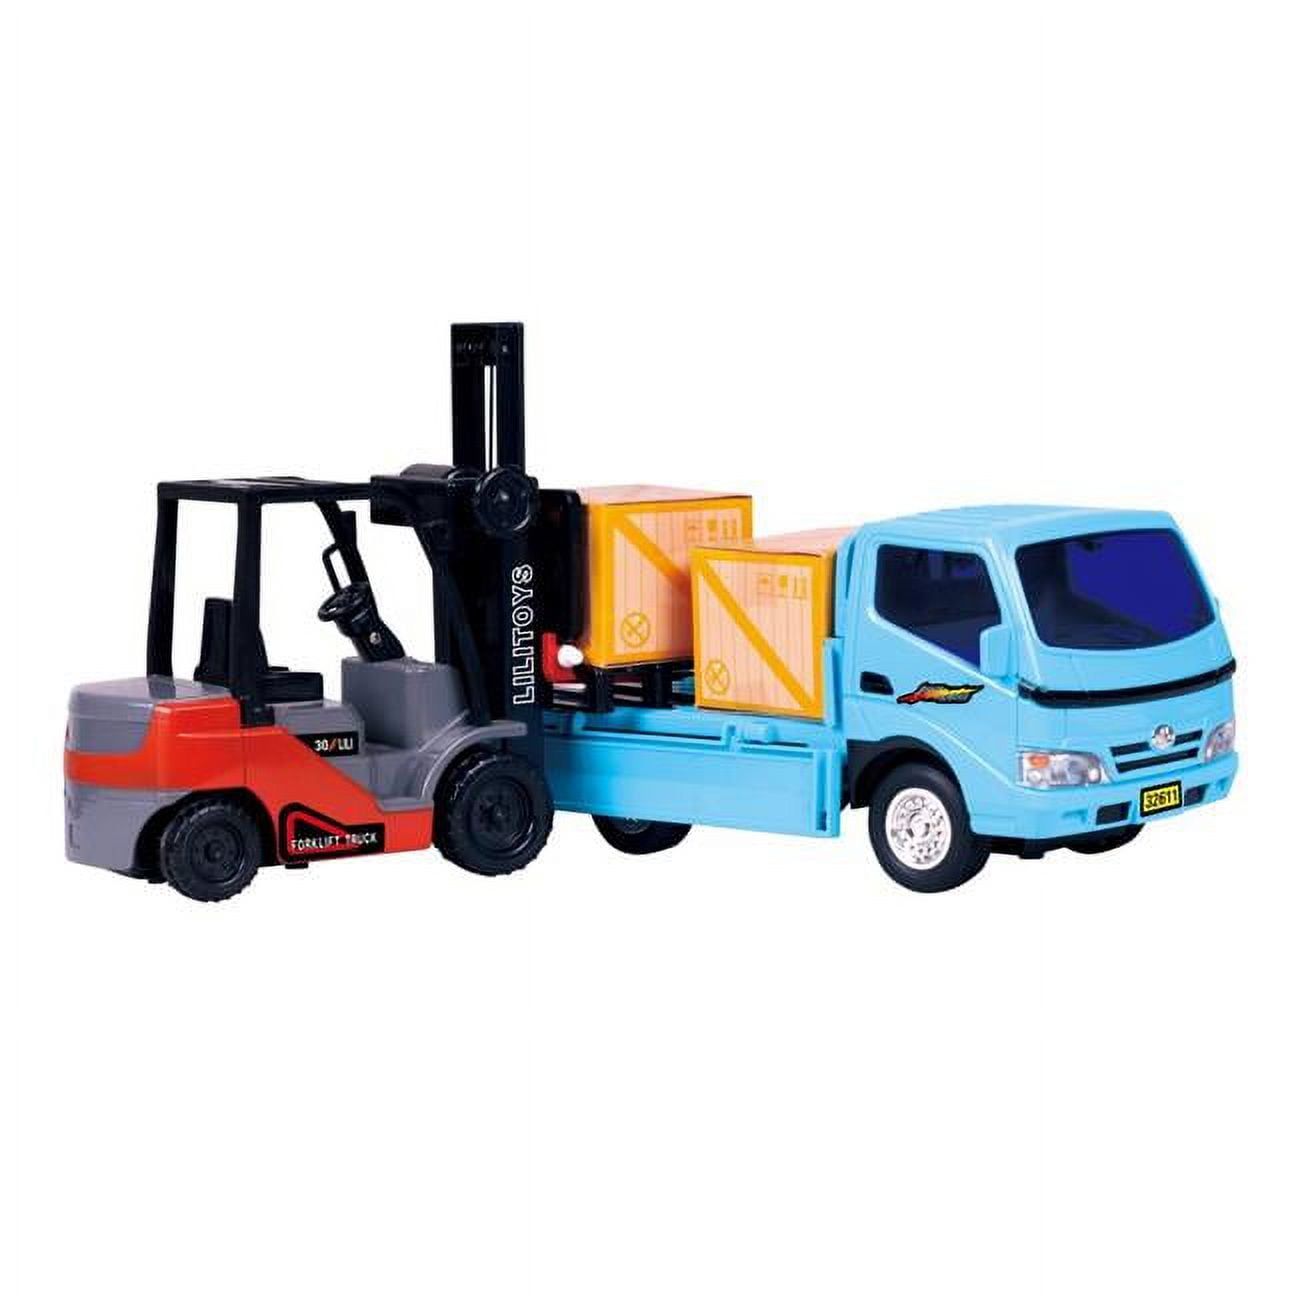 T526 Friction Powered Forklift & Truck Play Set Vehicle With 2 Cargo Box & A Pallet